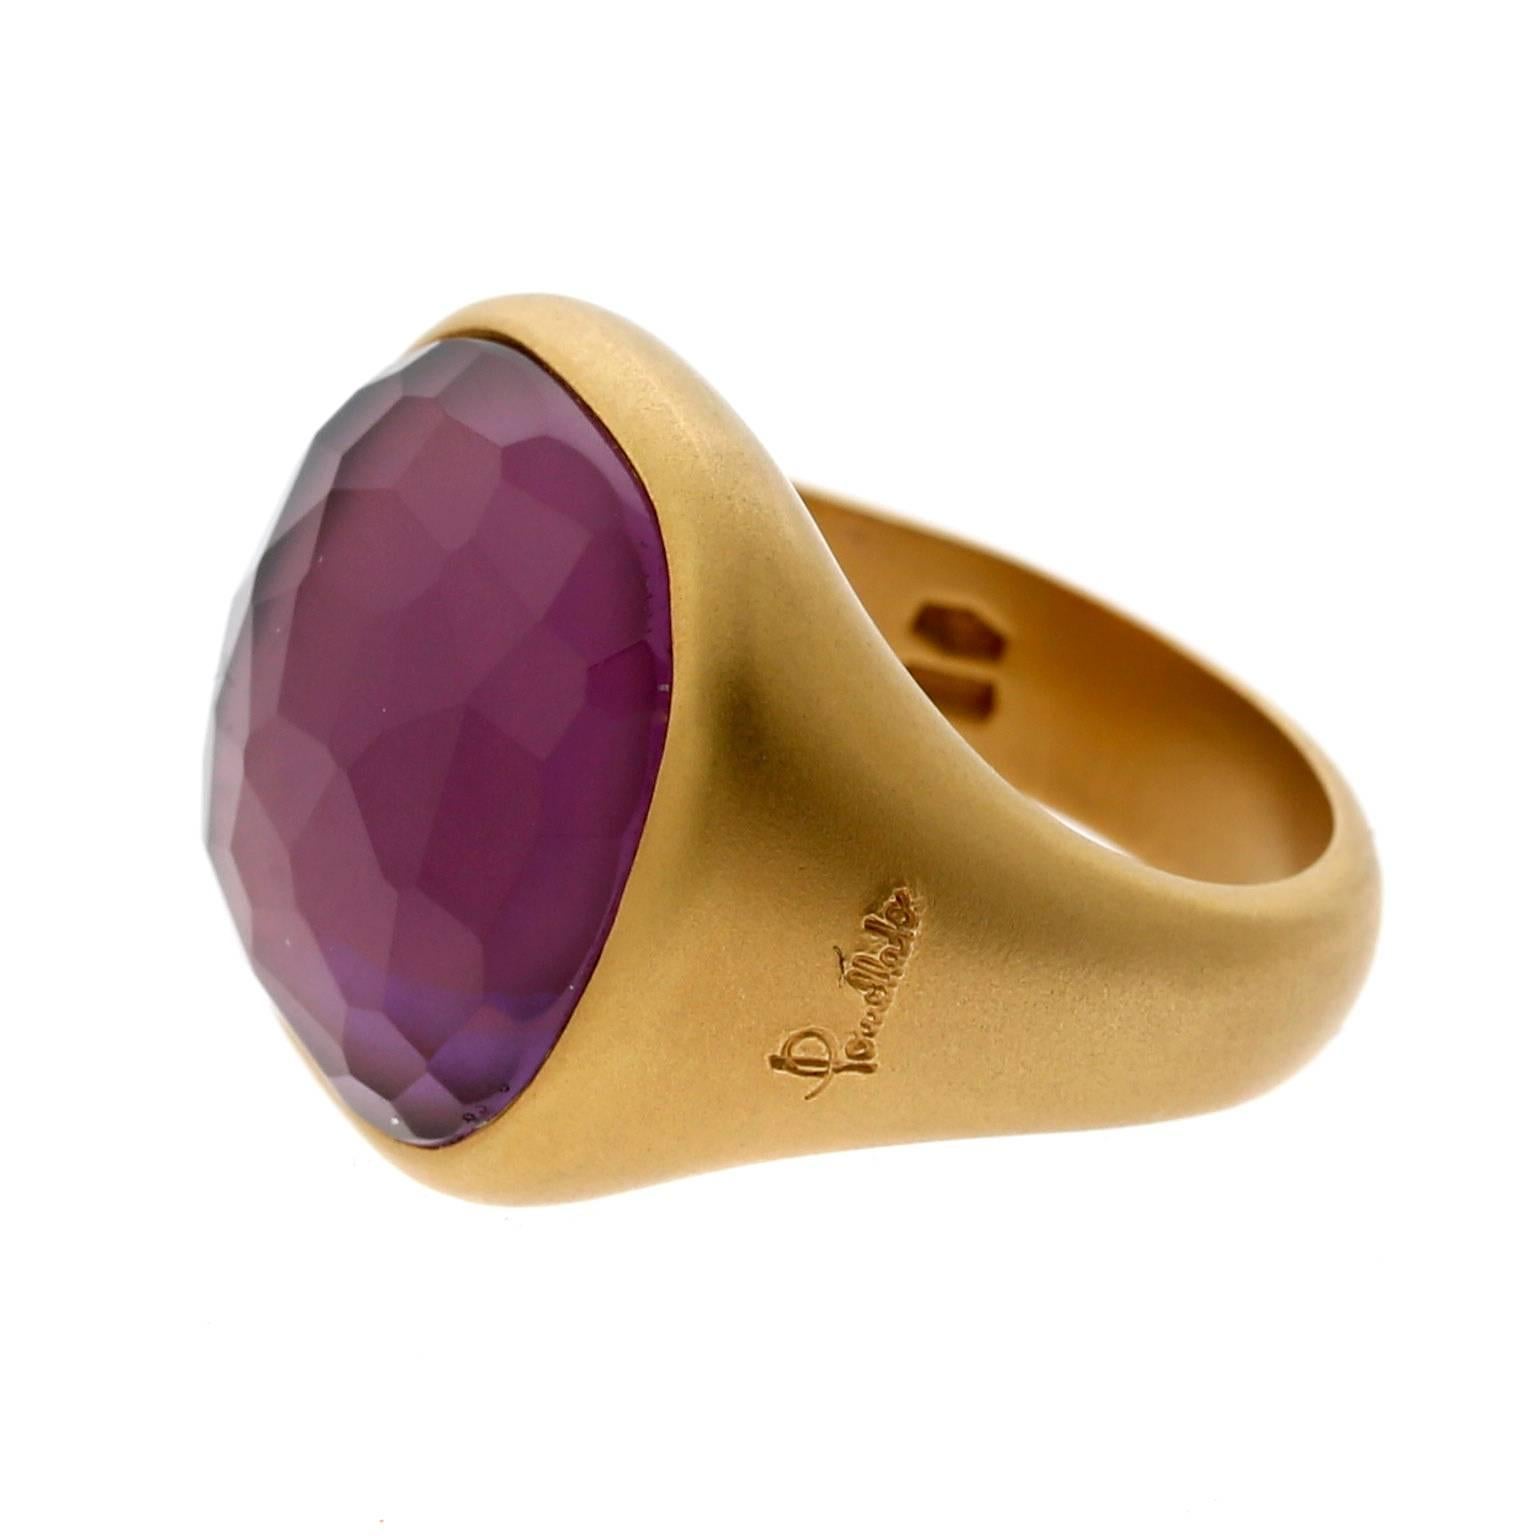 A fabulous Pomellato ring featuring a faceted amethyst stone set in 18k rose gold. Size 6.5

Pomellato Retail: 5500 + Tax